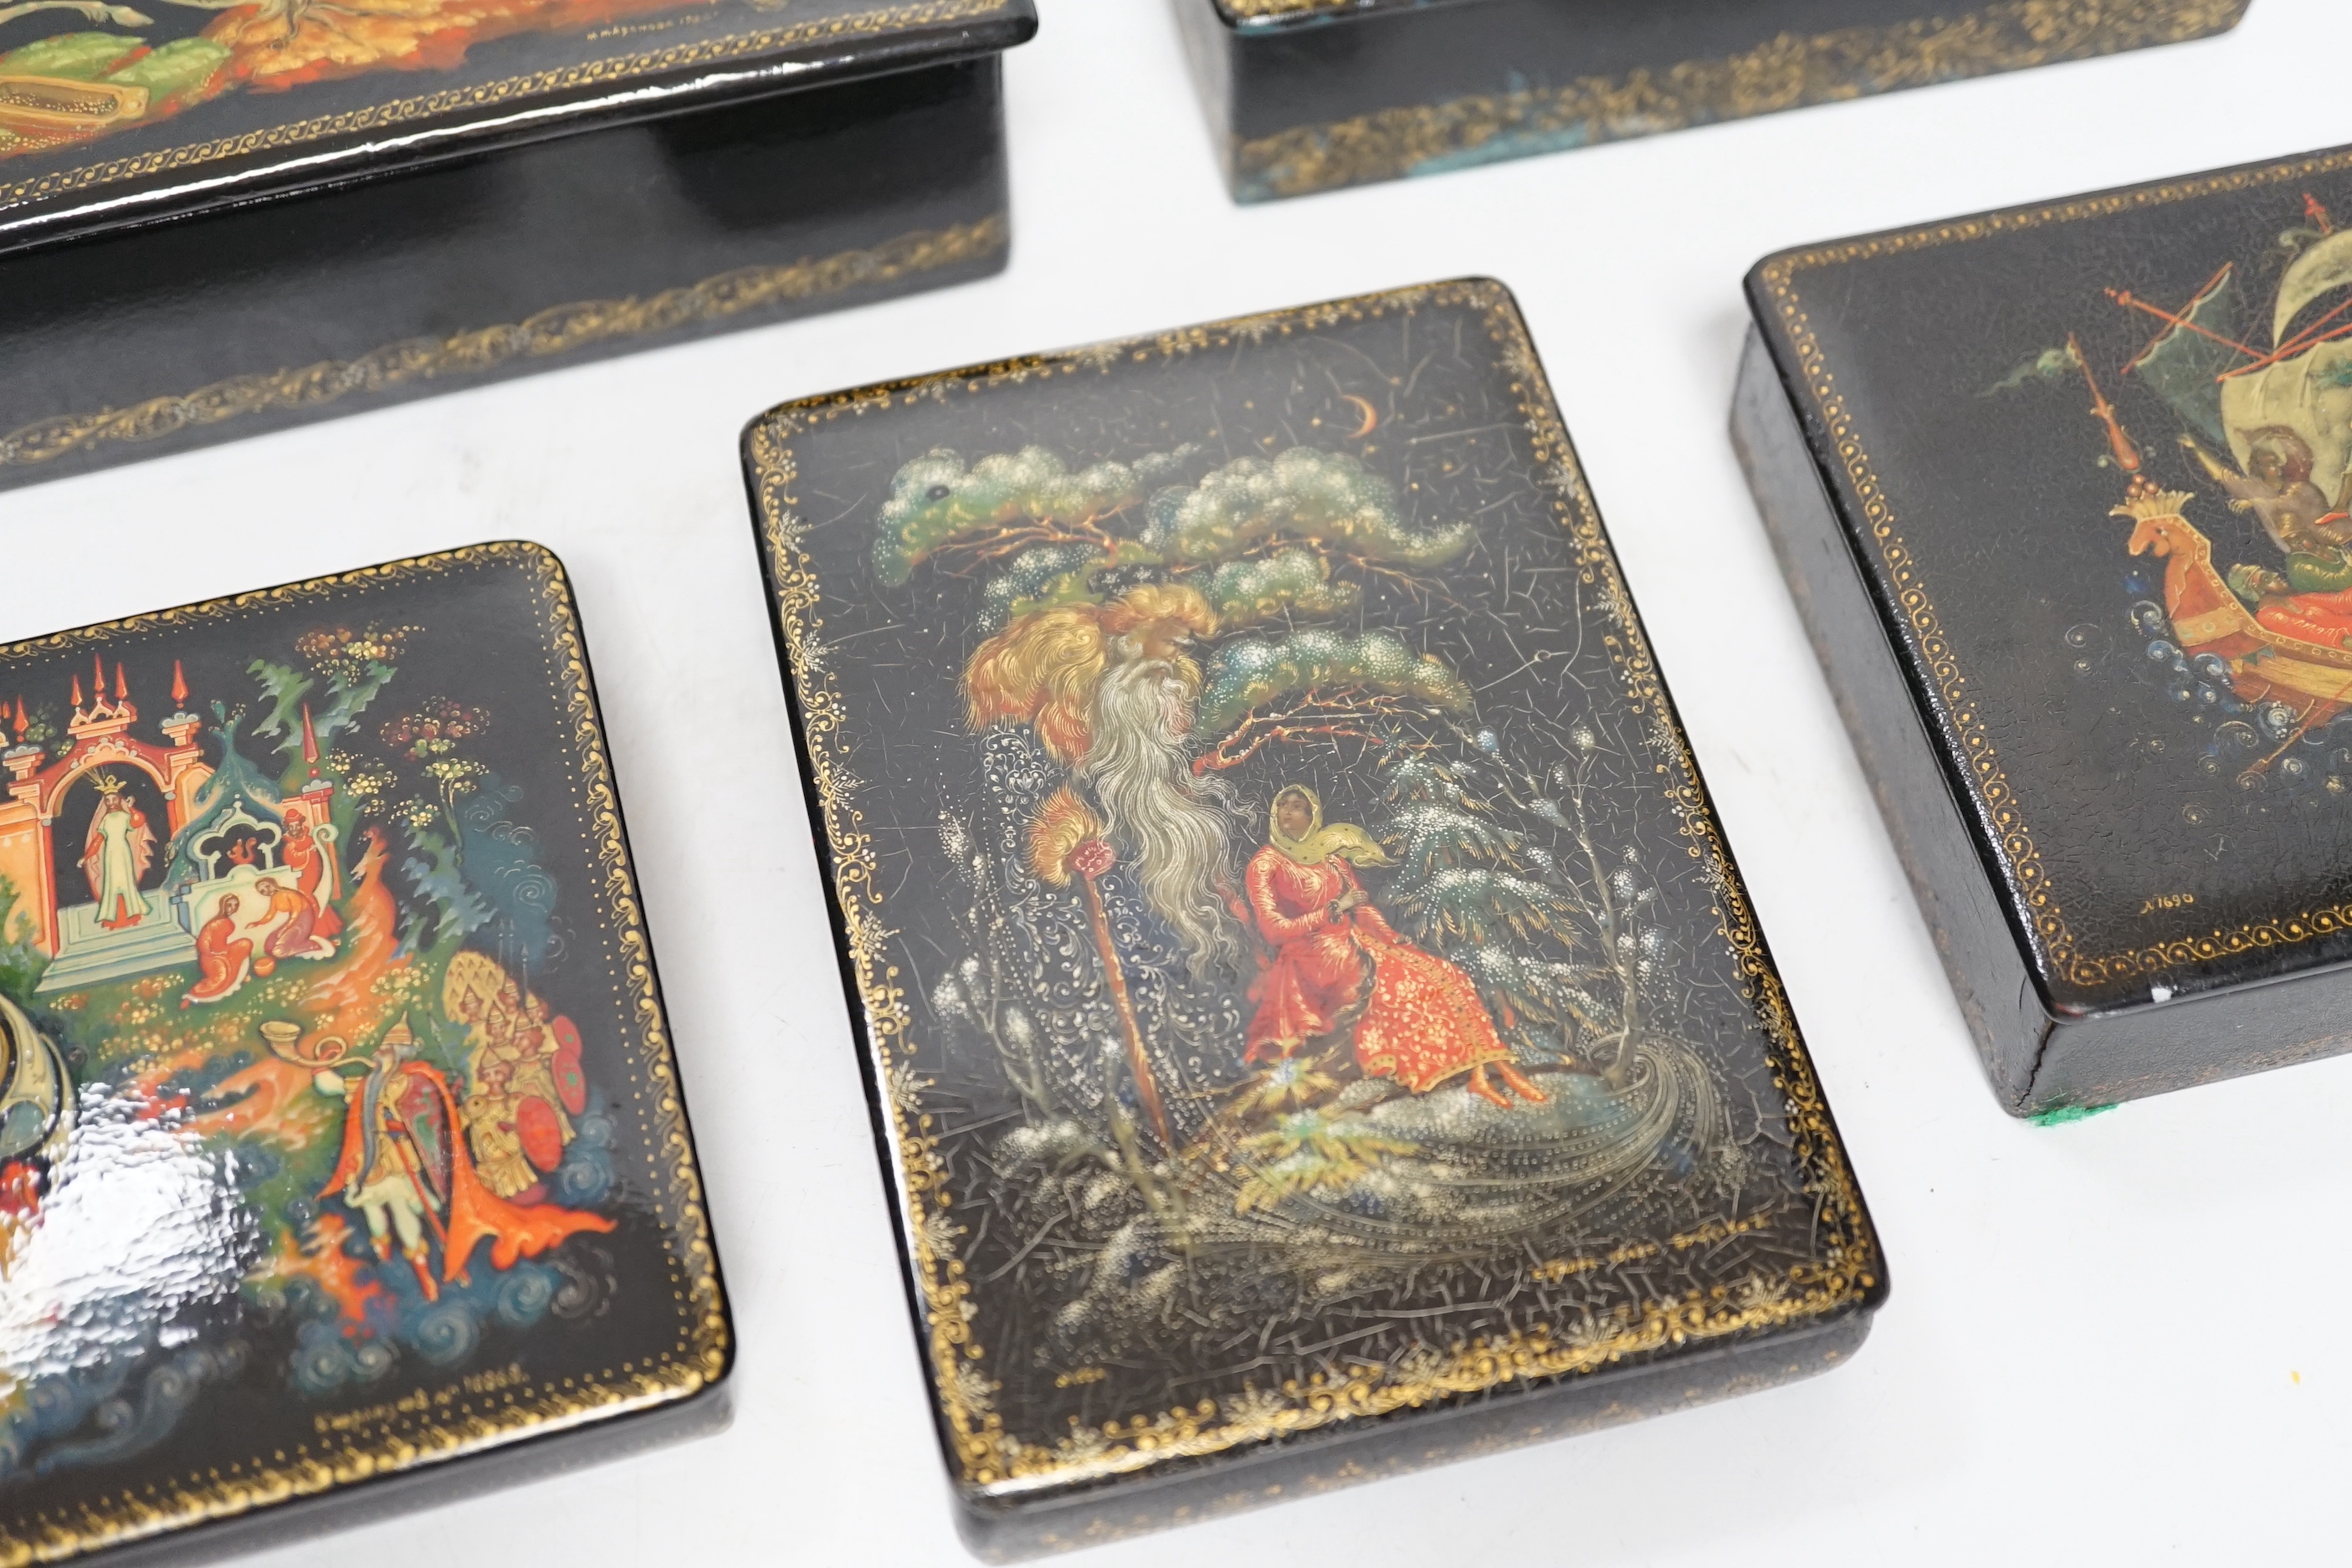 Five Russian Palekh lacquer table boxes, each painted with figures from legend, each signed by the artist, the largest 17 cm wide